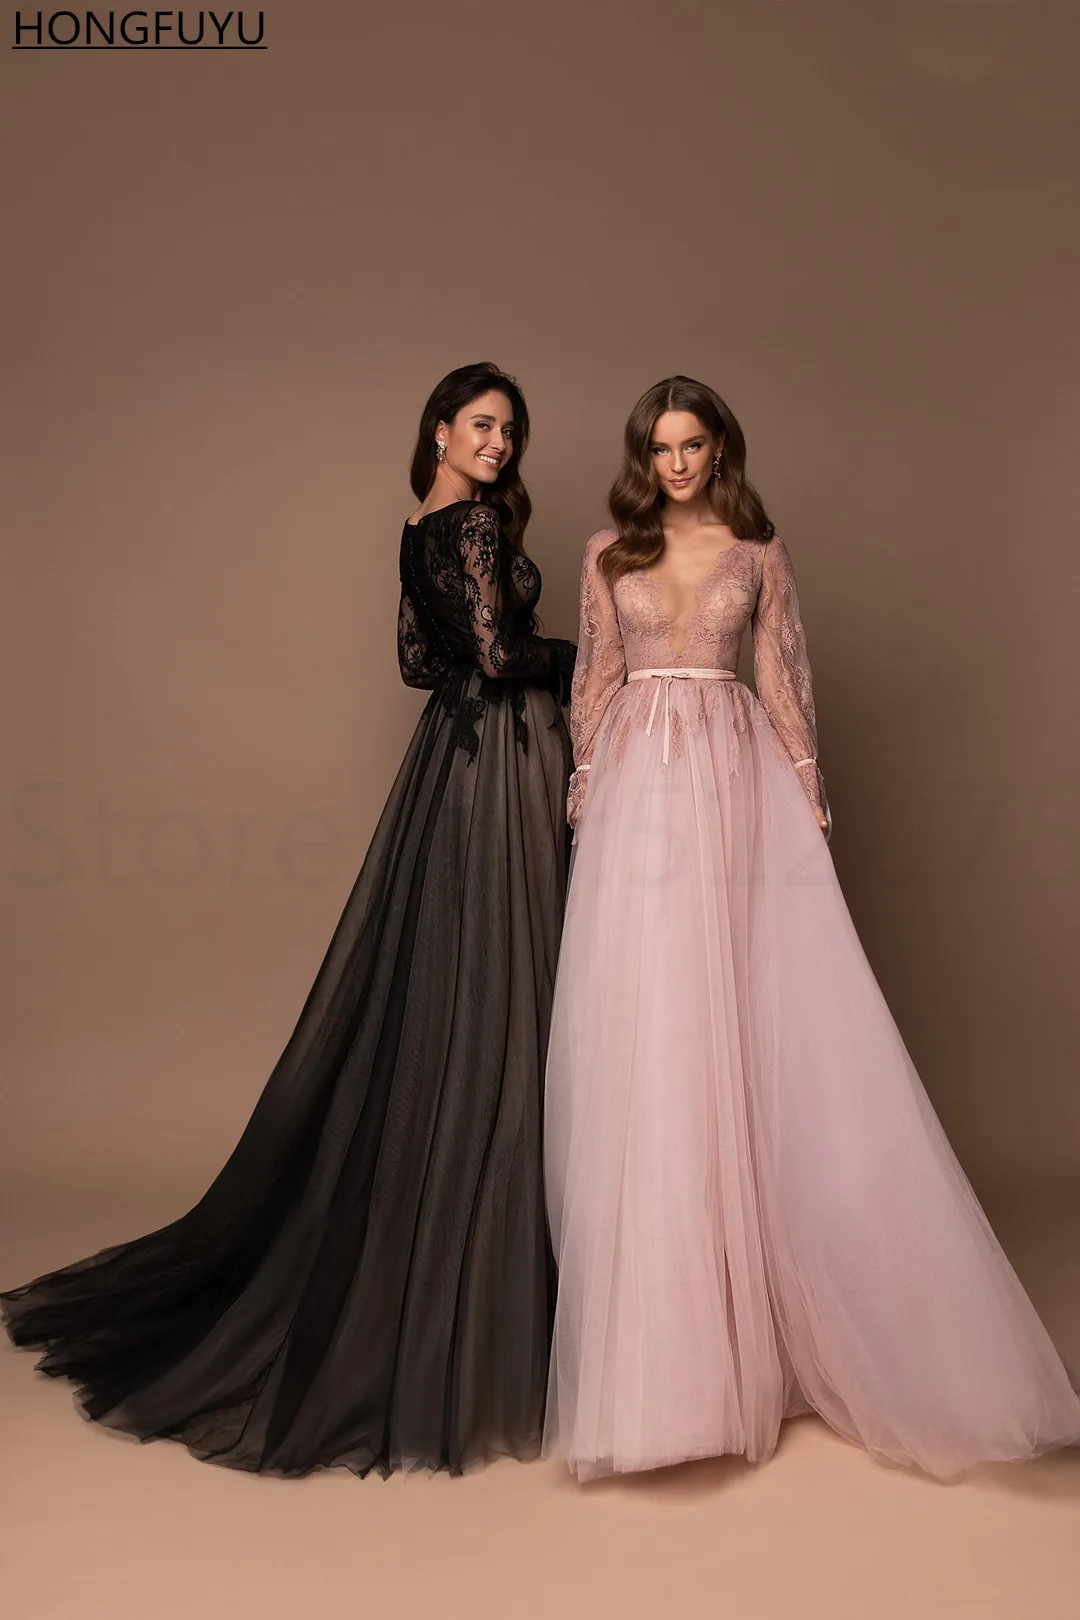 sage green prom dress HONGFUYU Sheer Deep V Neck Tulle A-line Prom Dresses 2022 Long Sleeves Lace Formal Evening Gowns for Women Party Lace Up Corset long prom dresses